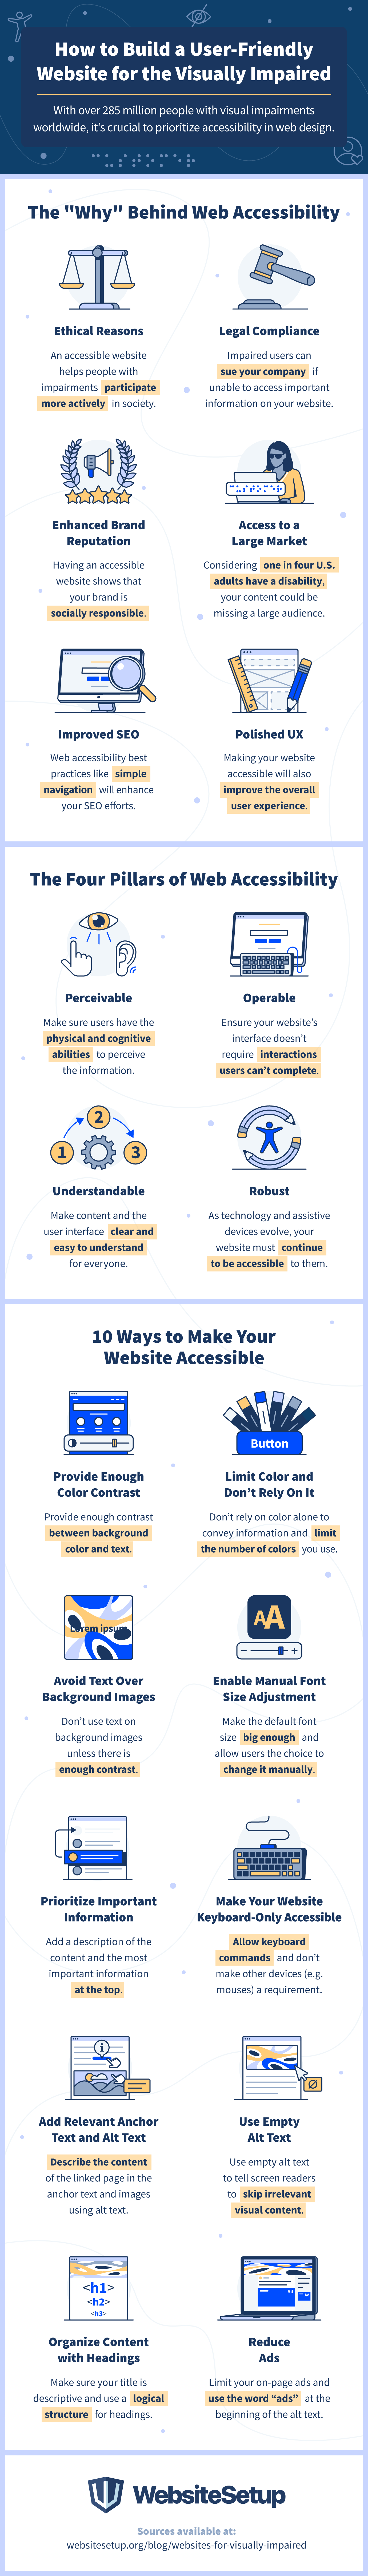 How to Build a User-Friendly Website for the Visually Impaired in 2021: infographic describing The "Why" Behind Web Accessibility, The Four Pillars of Web Accessibility, and the 10 Ways to Make Your Website Accessible